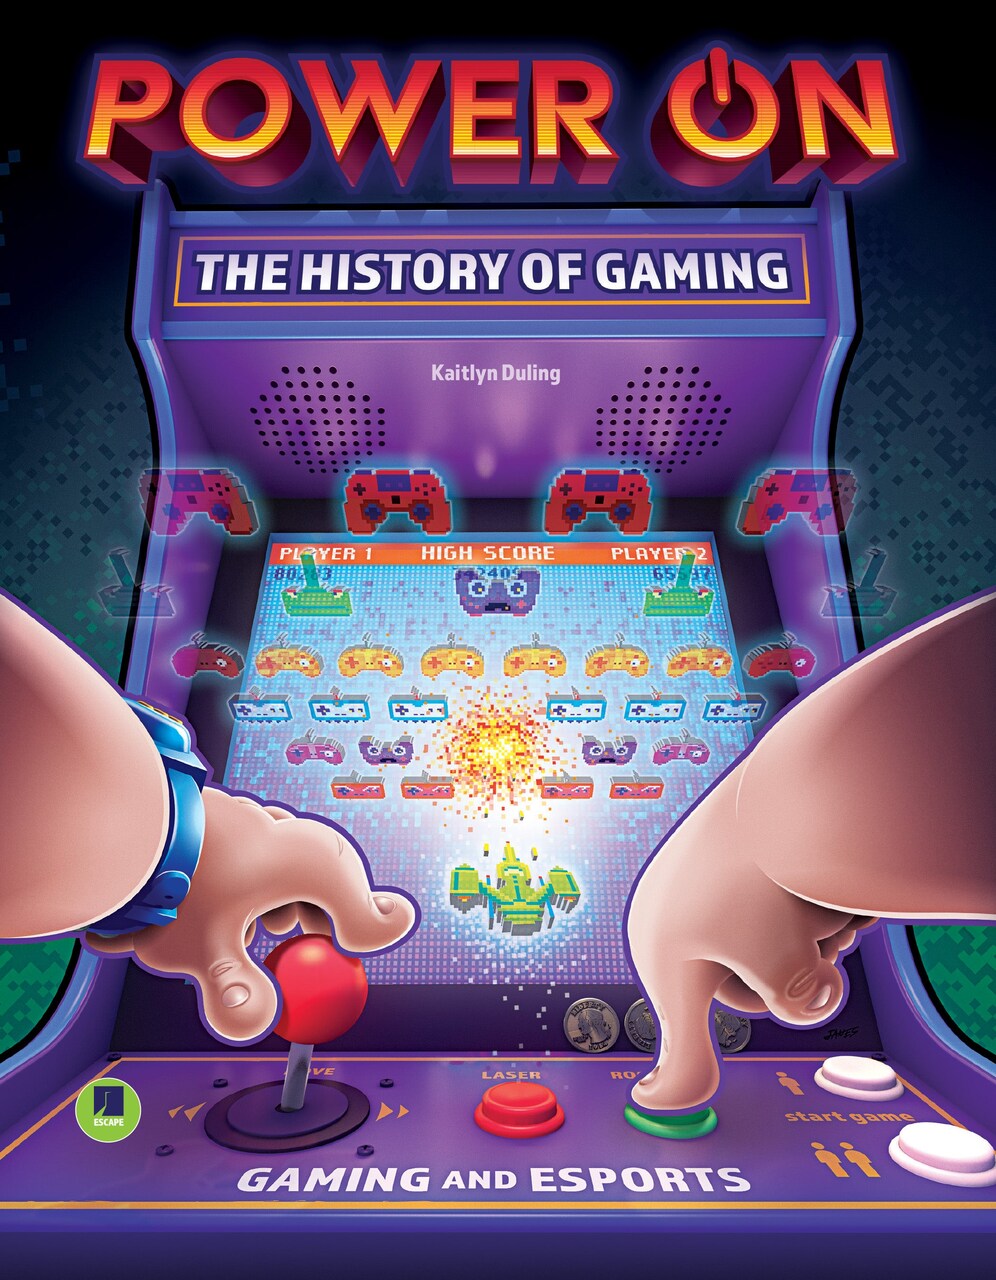 Rourke Educational Media Power On: The History of Gaming&#x2014;The History Behind Popular Video Games, Characters, Consoles, and the Evolution of eSports, Grades 3-8 Leveled Readers (32 pgs) Reader